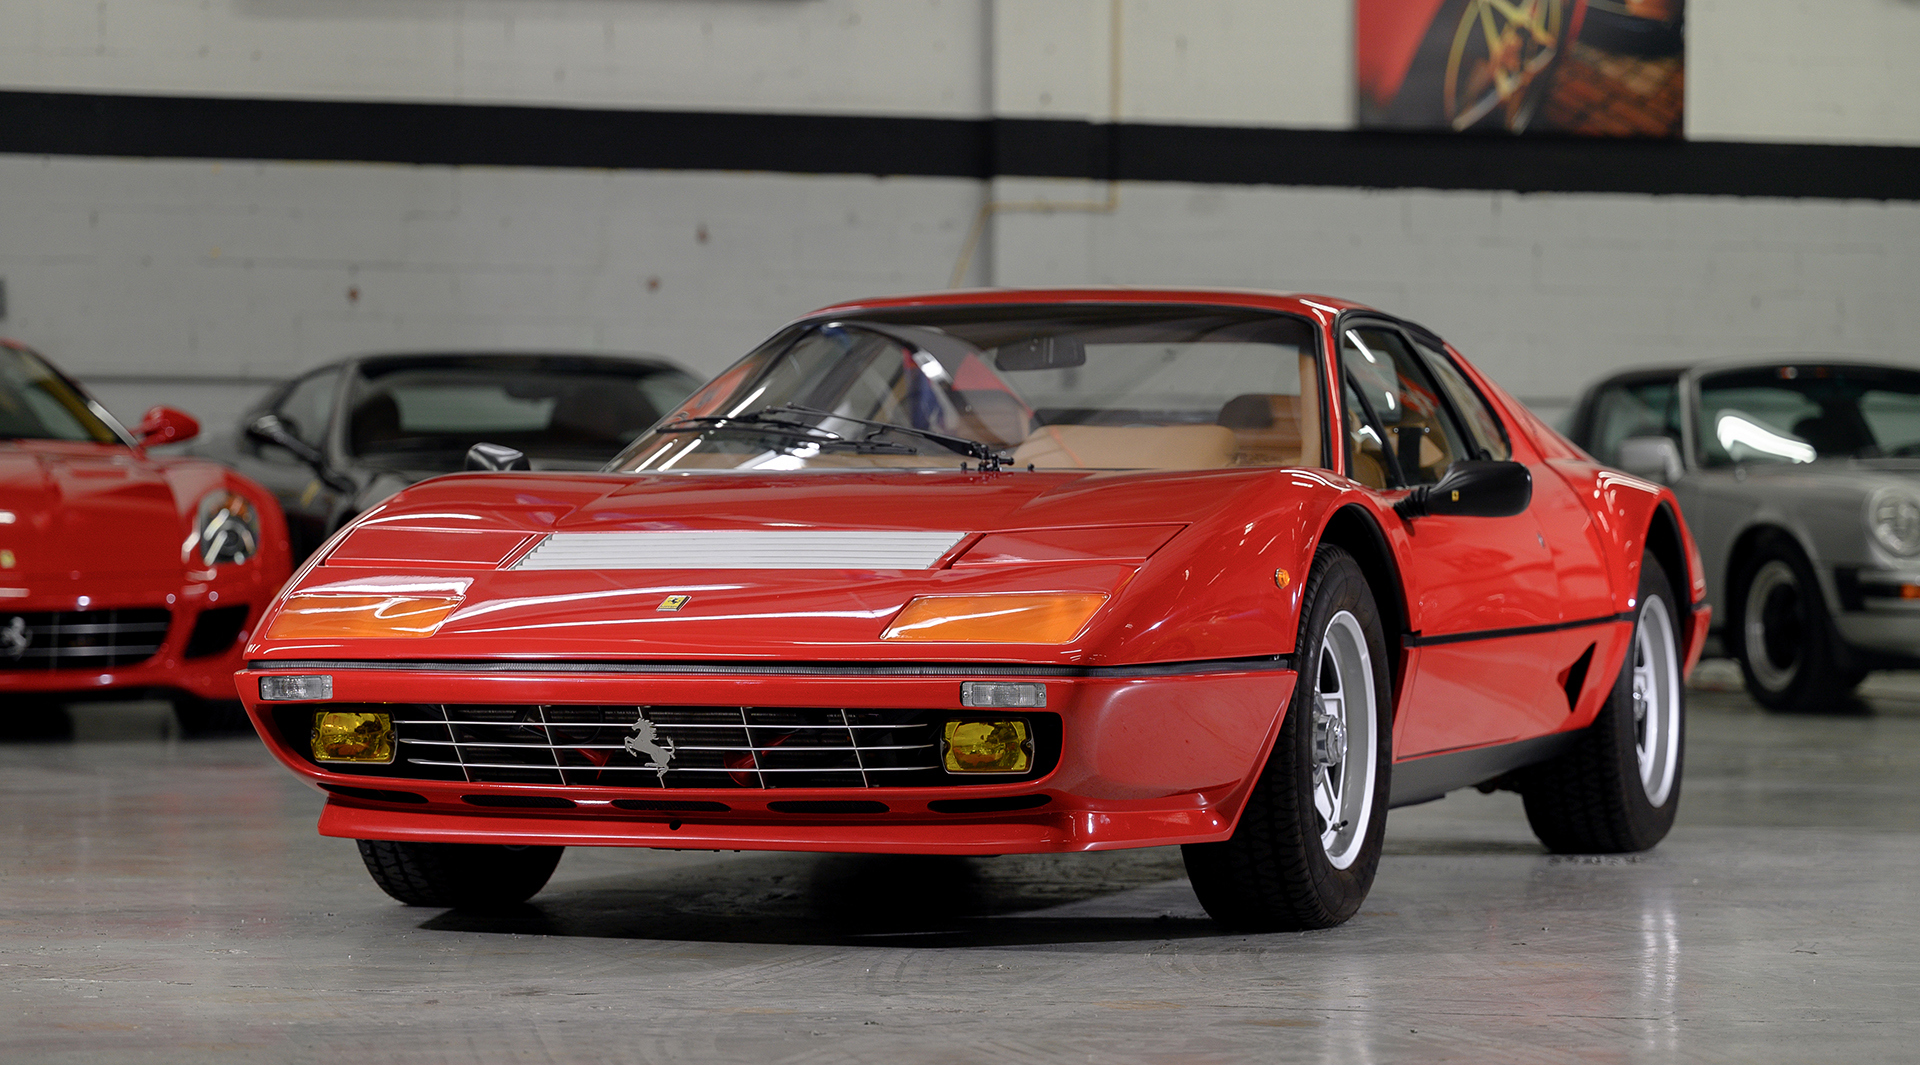 1984 Ferrari 512 BBi offered at RM Sotheby’s Amelia Island live auction 2022